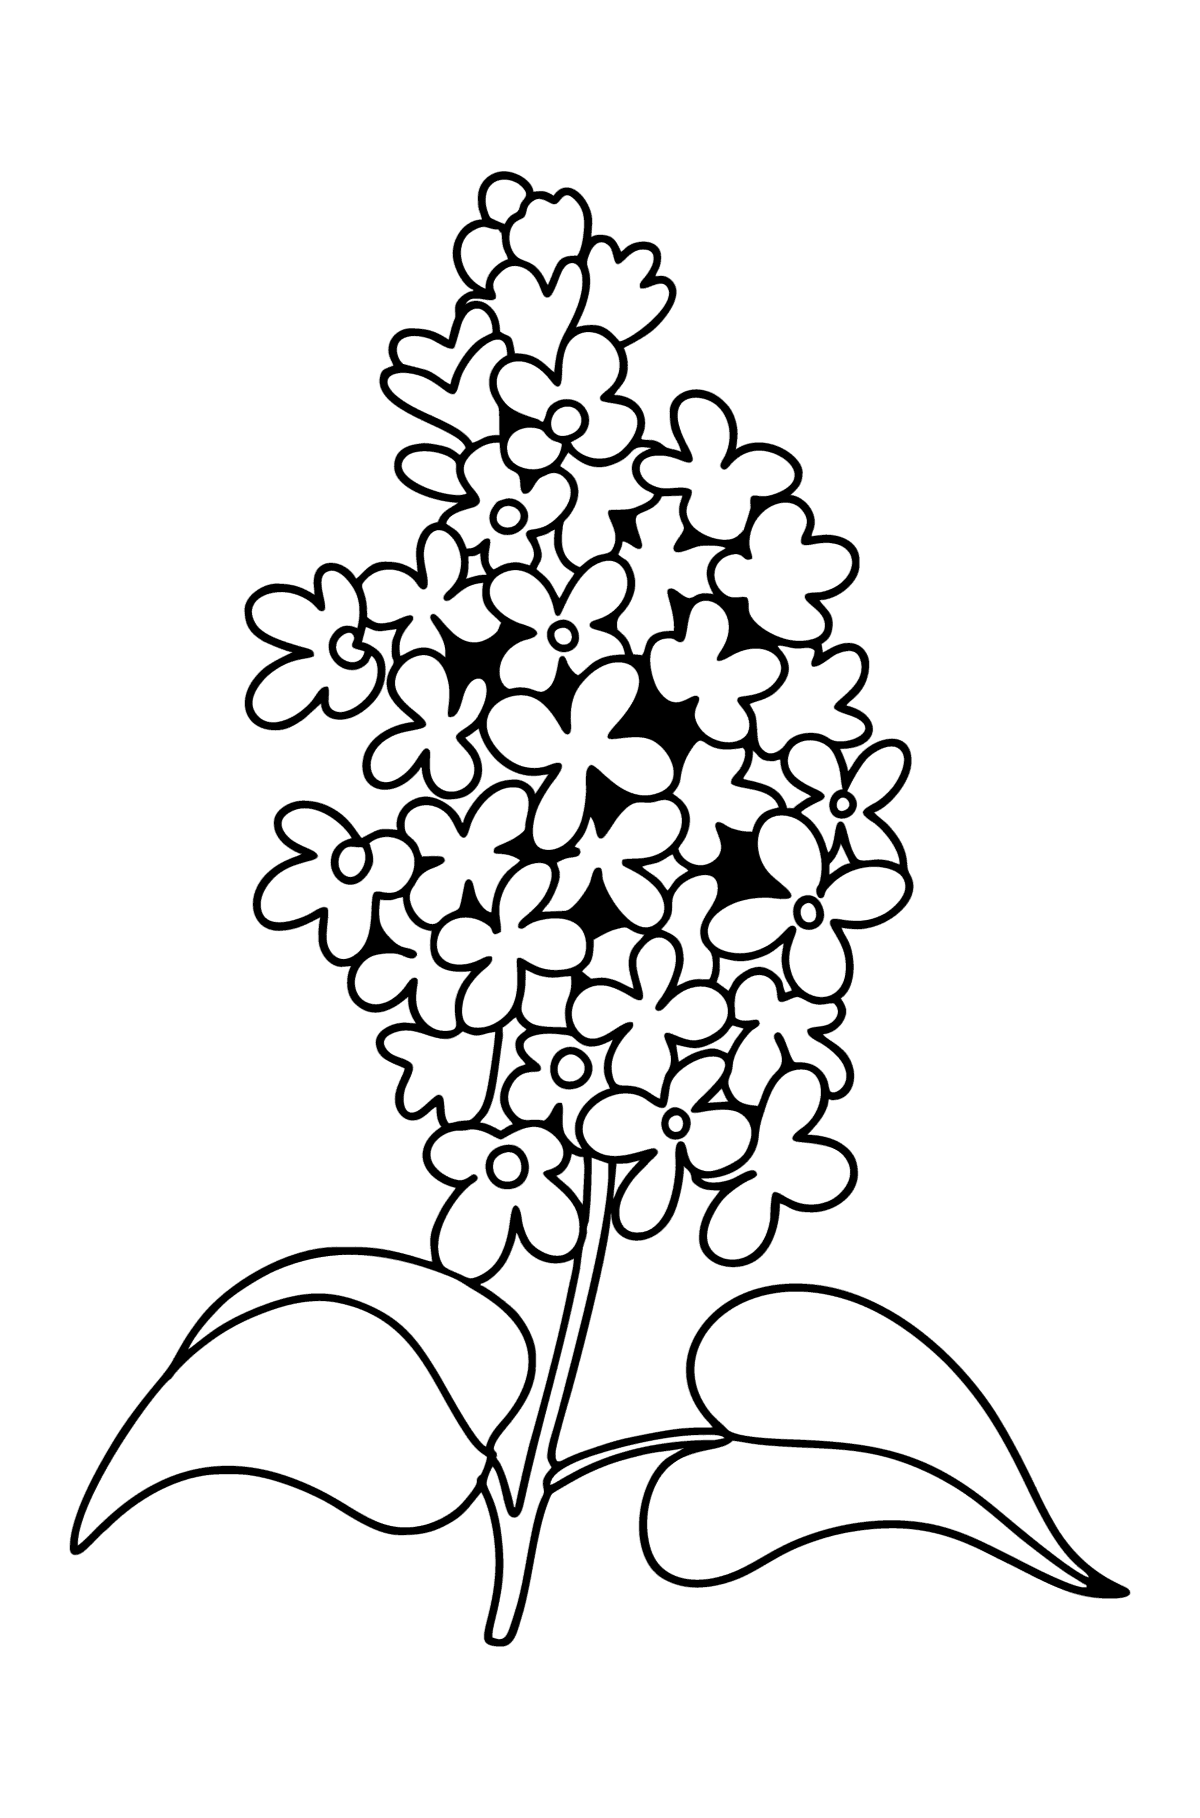 Lilac sprig coloring page â online and print for free